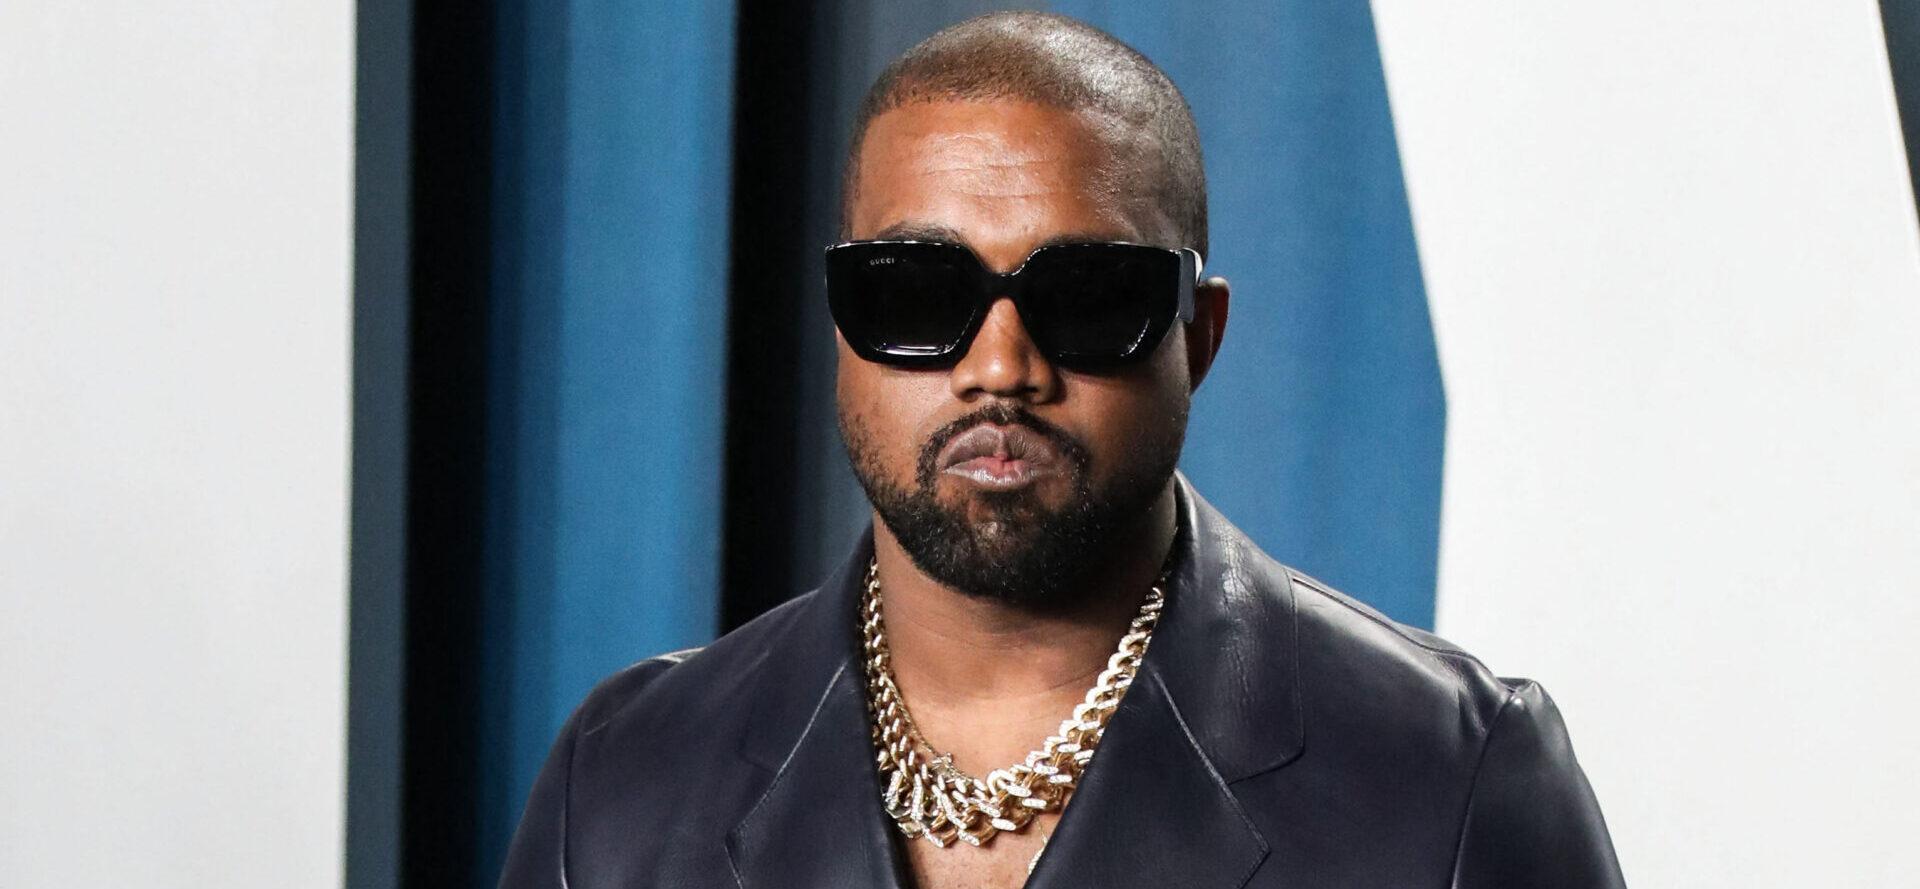 Kanye West Labeled An ‘Unrepentant Antisemite’ By Jewish Organisation